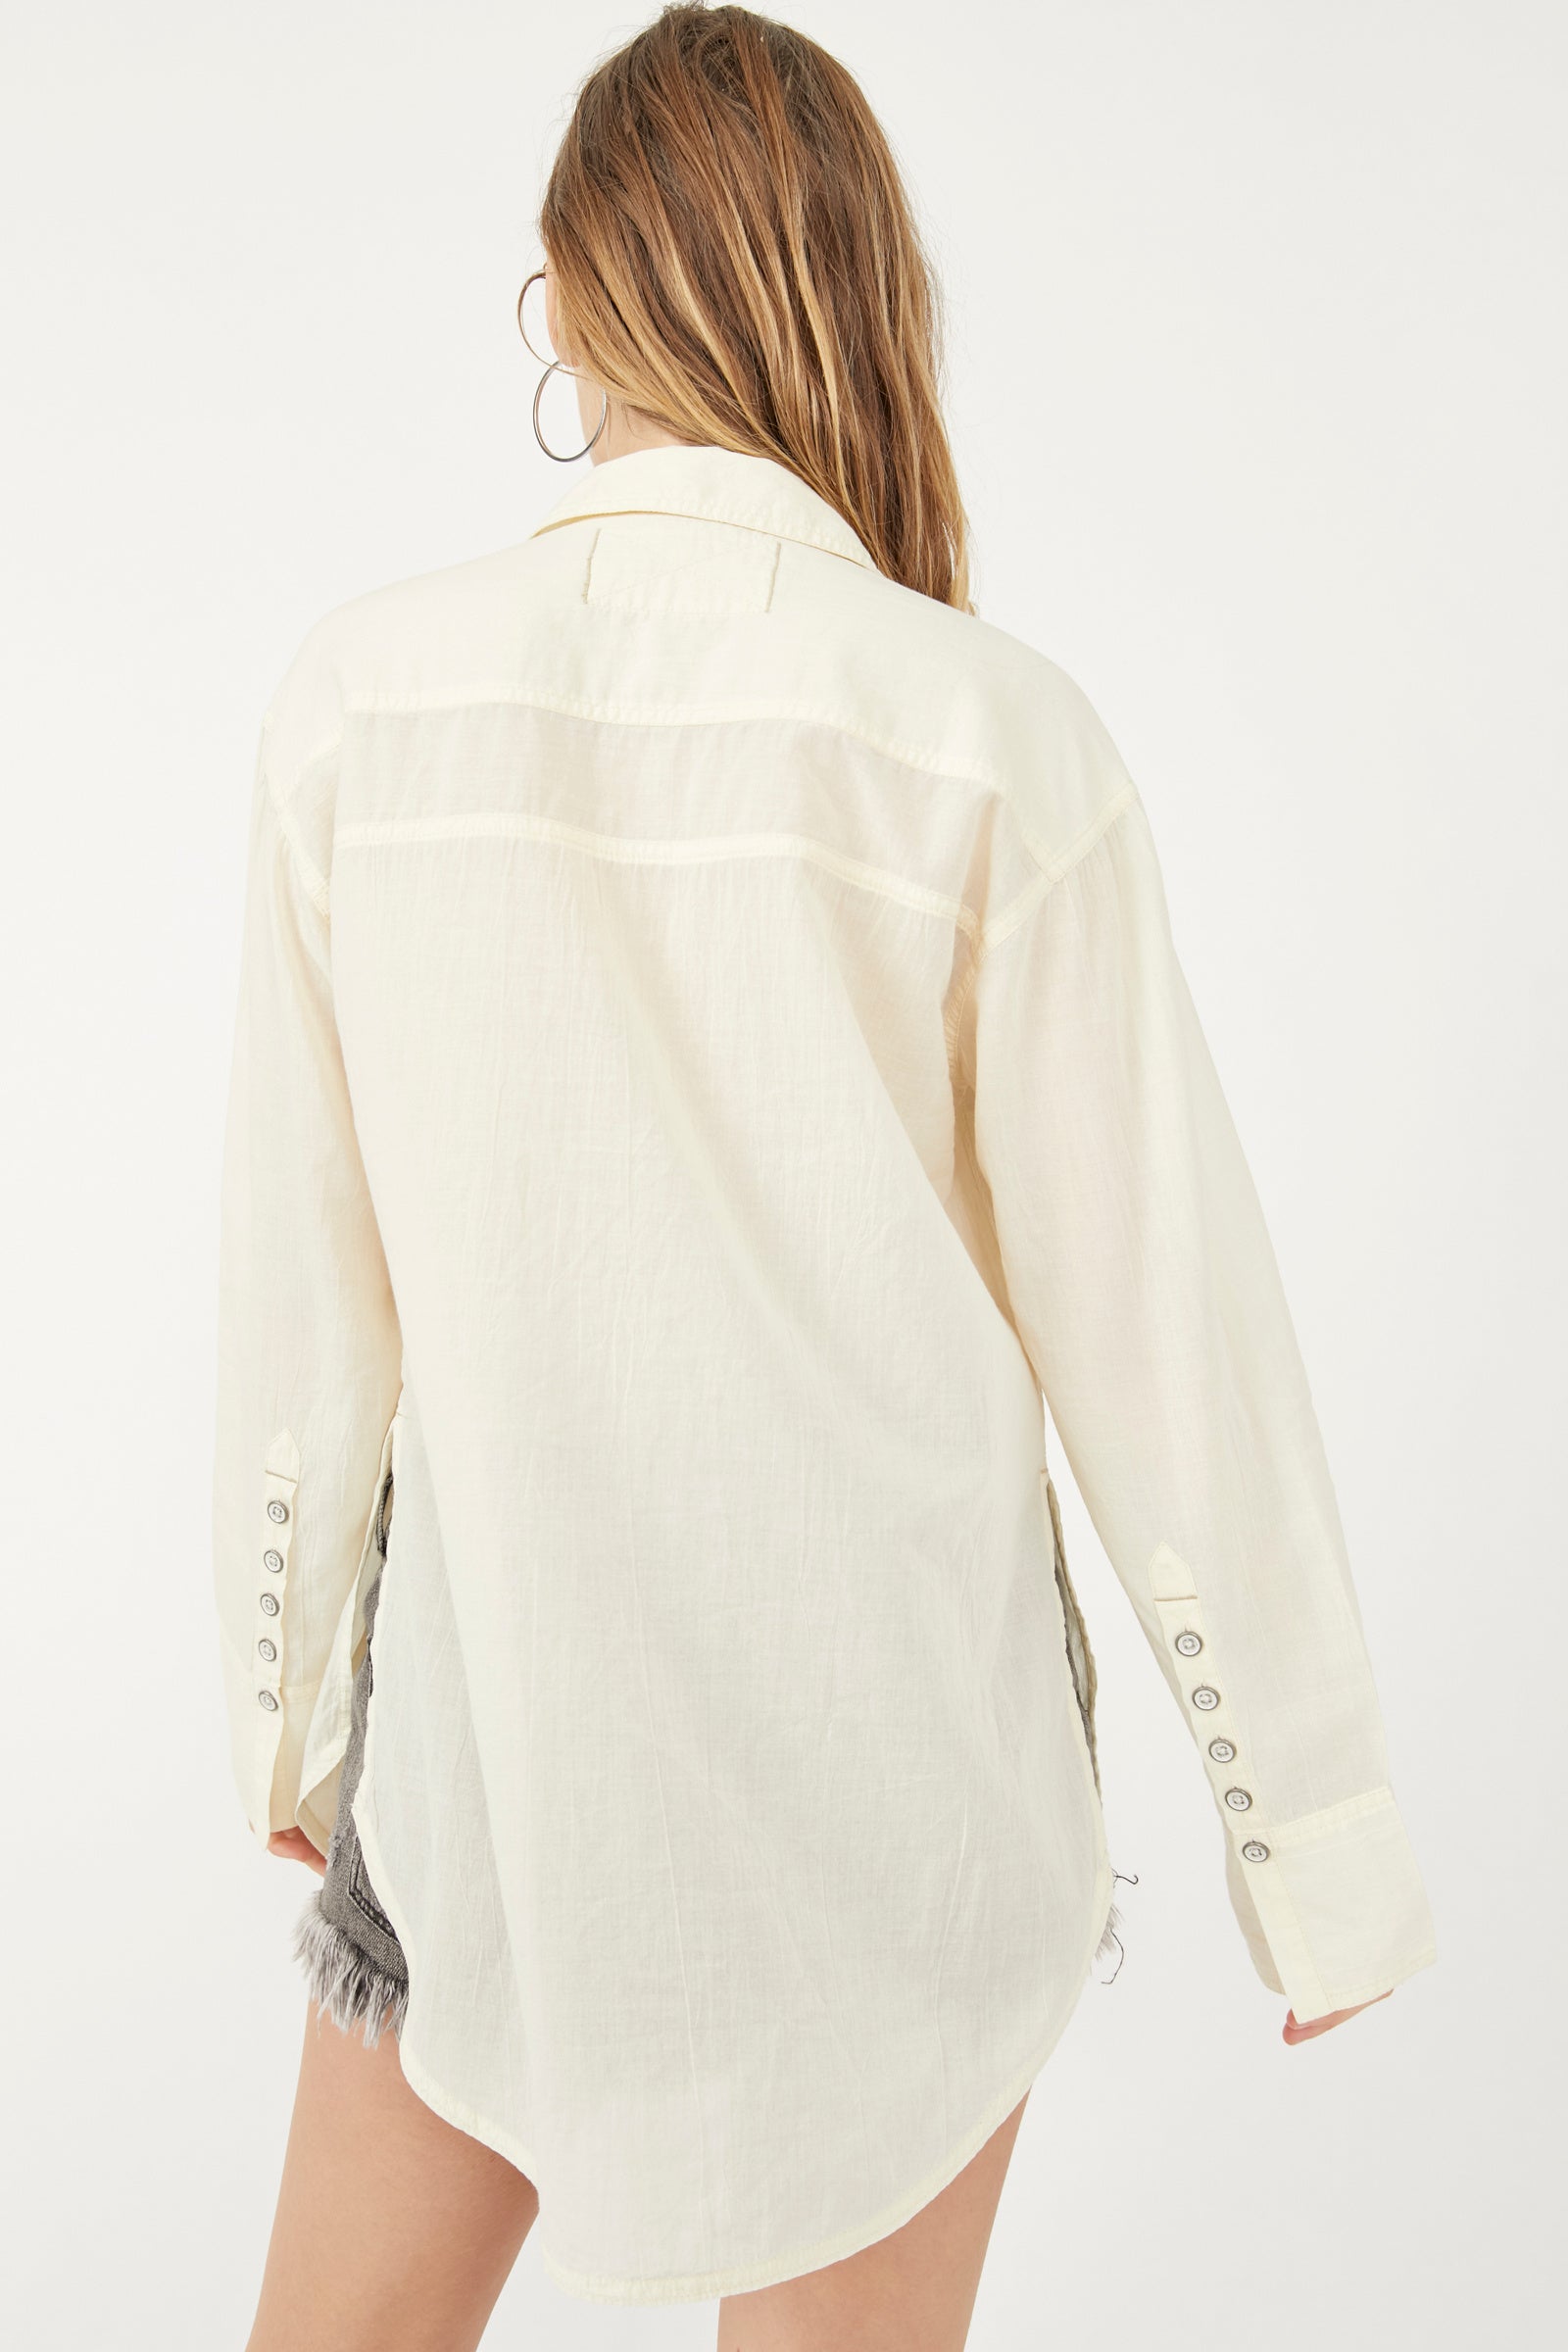 Sheer Luck Button Up Shirt Free People